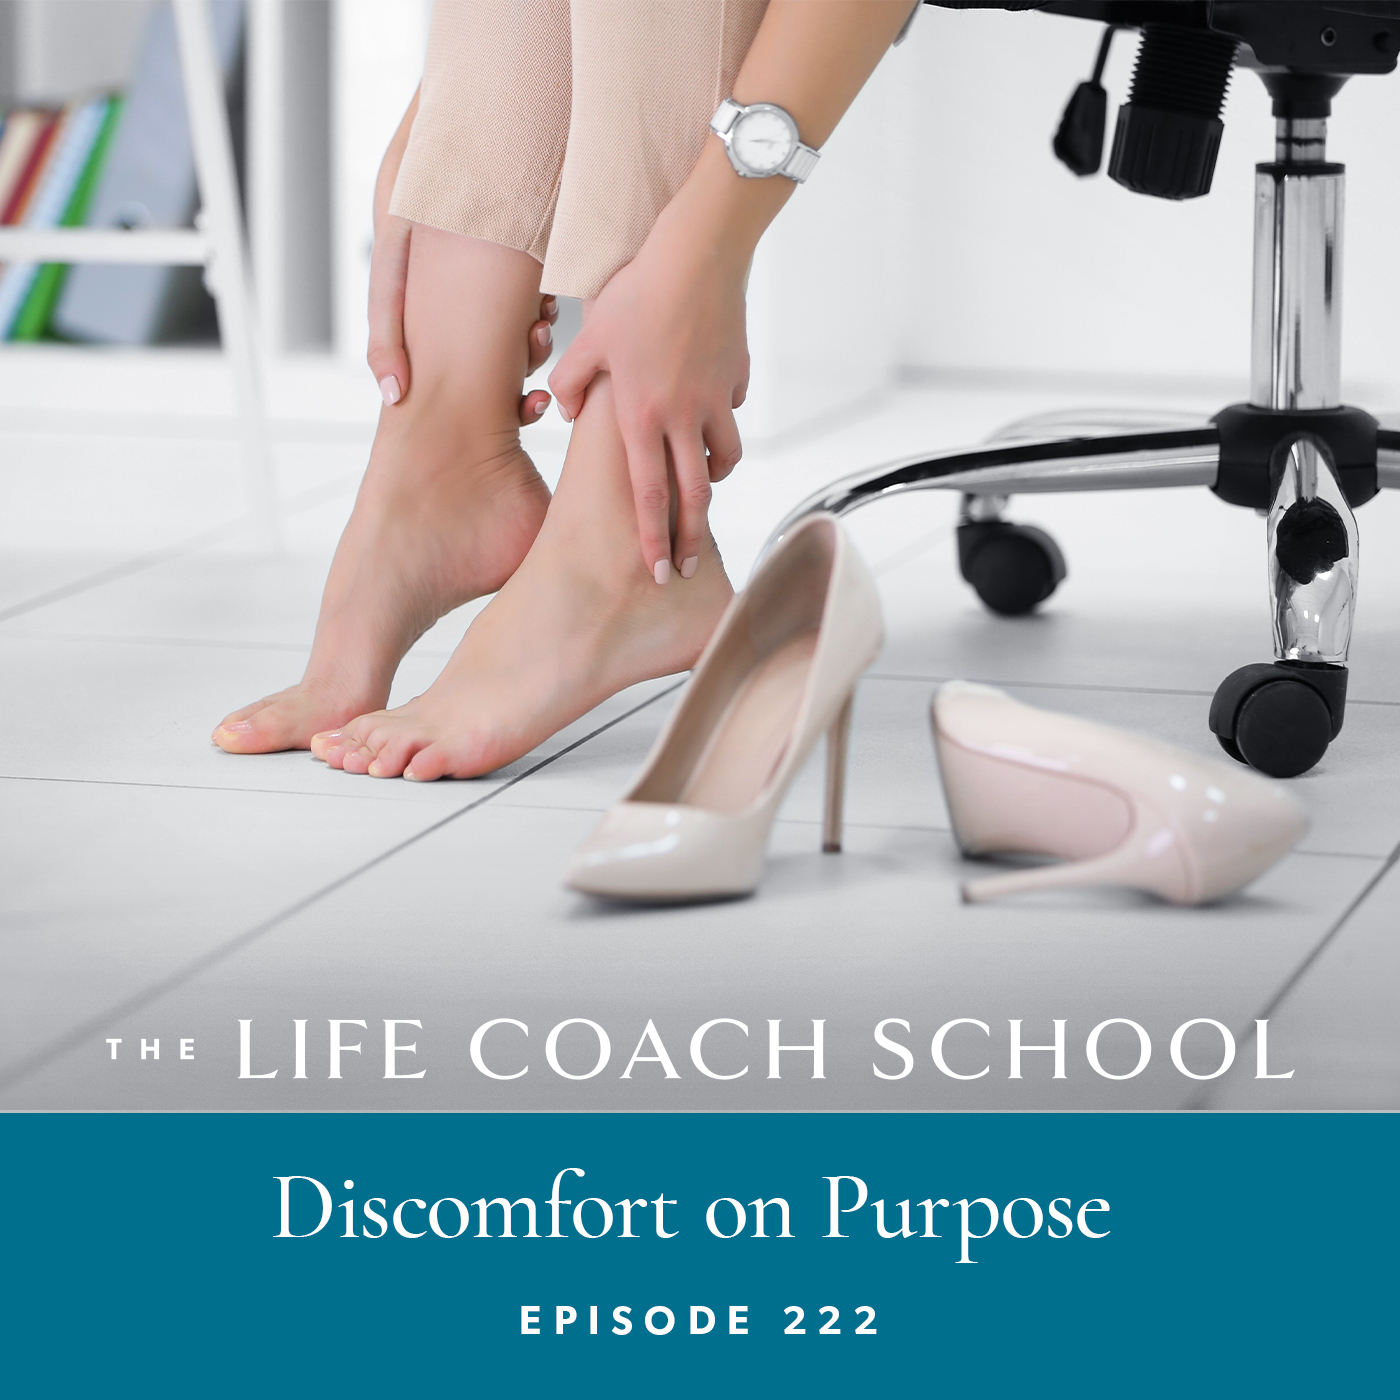 The Life Coach School Podcast with Brooke Castillo | Episode 222 | Discomfort on Purpose